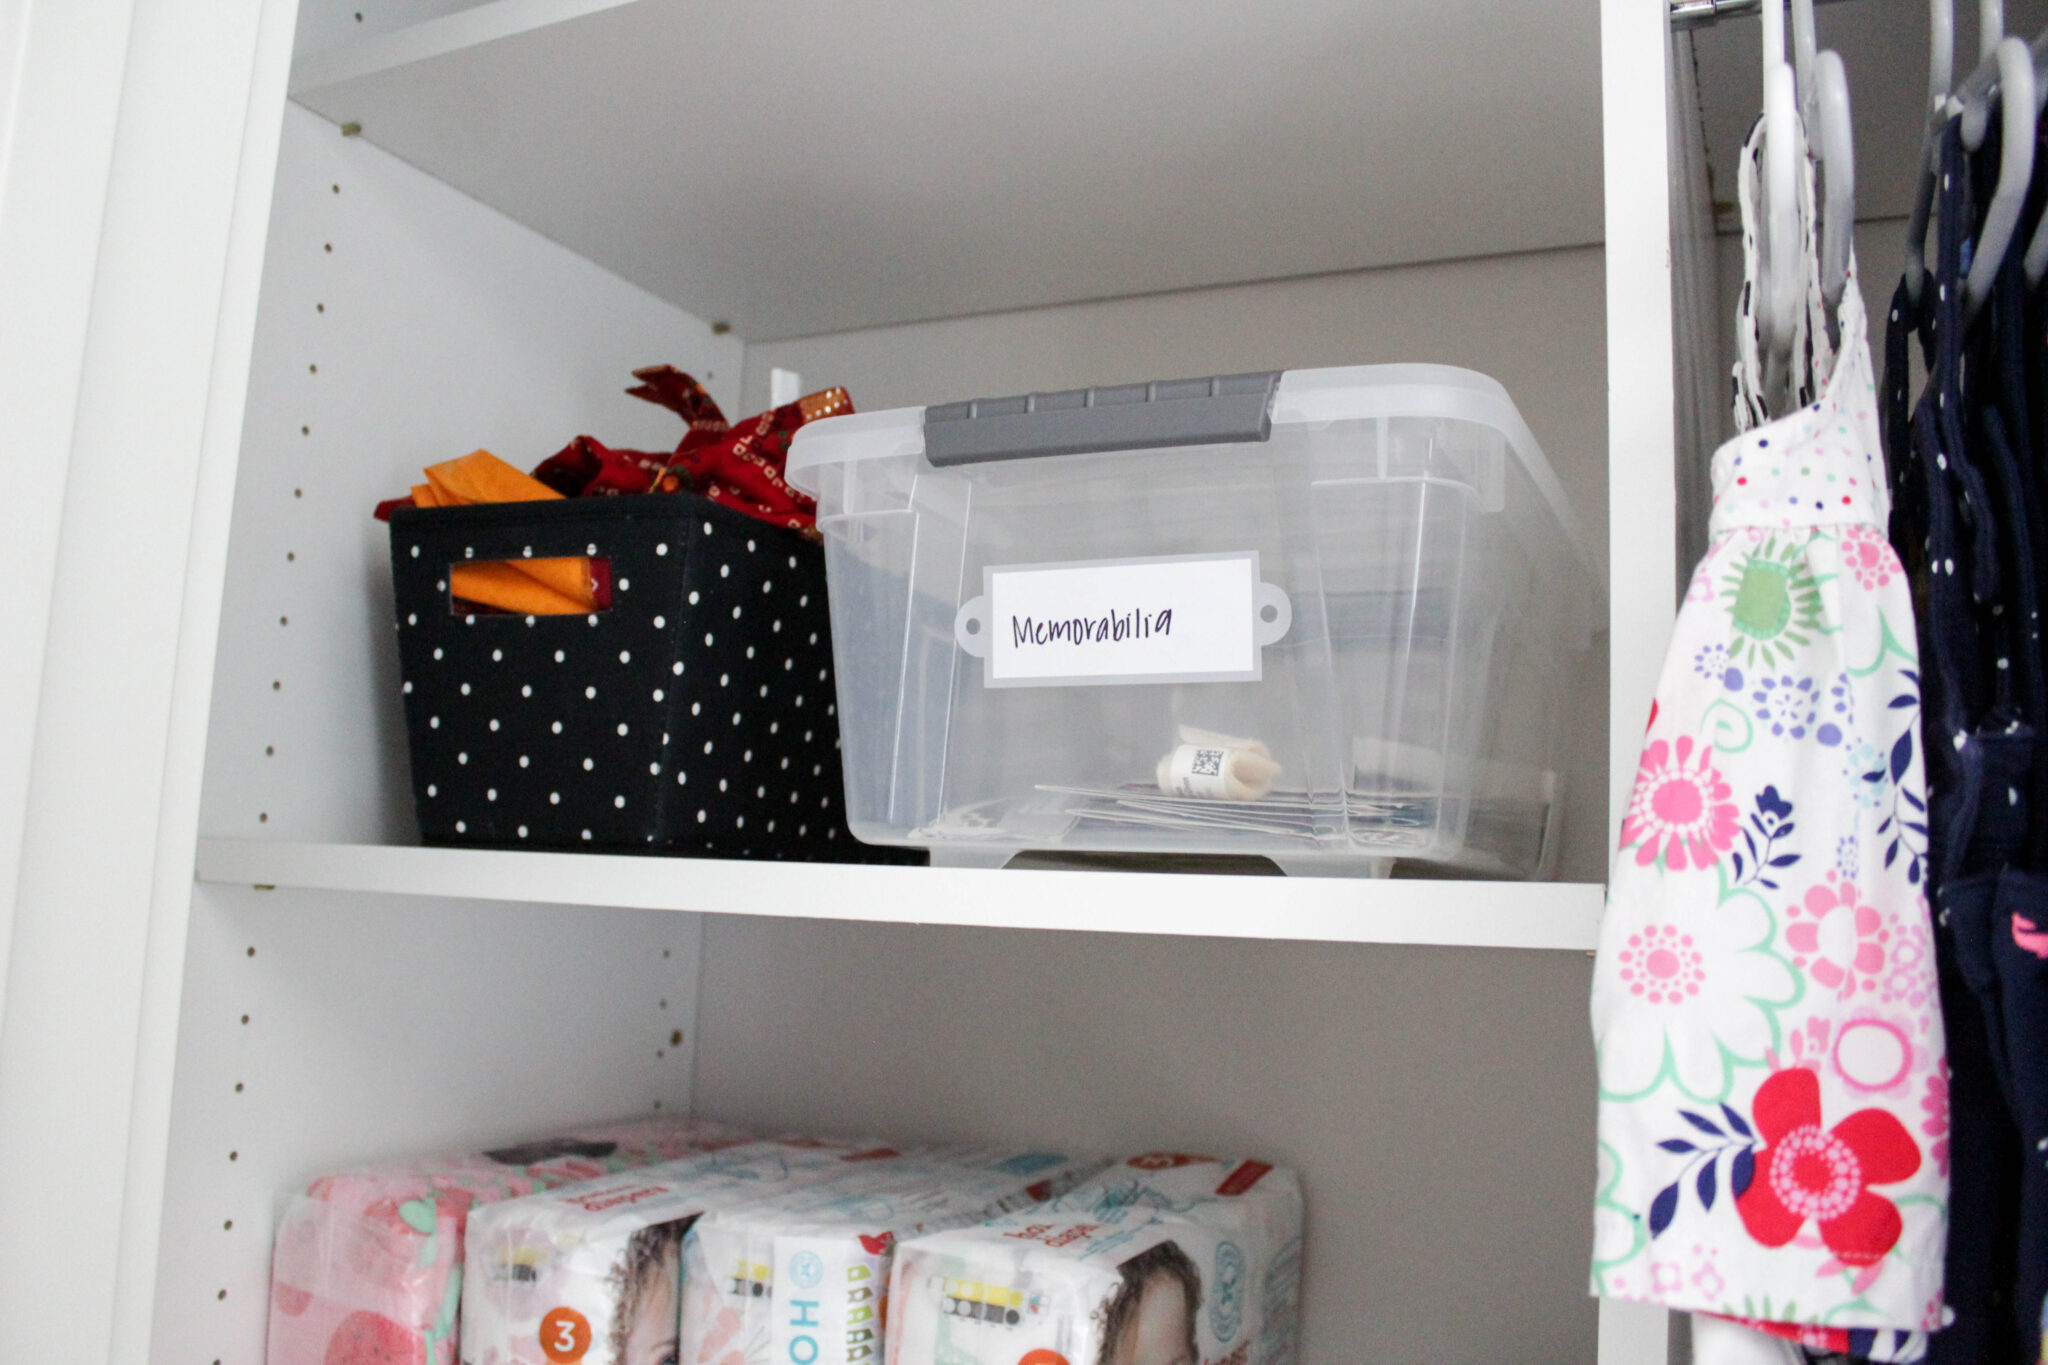 How to organize baby clothes and stuff, including memorabilia!